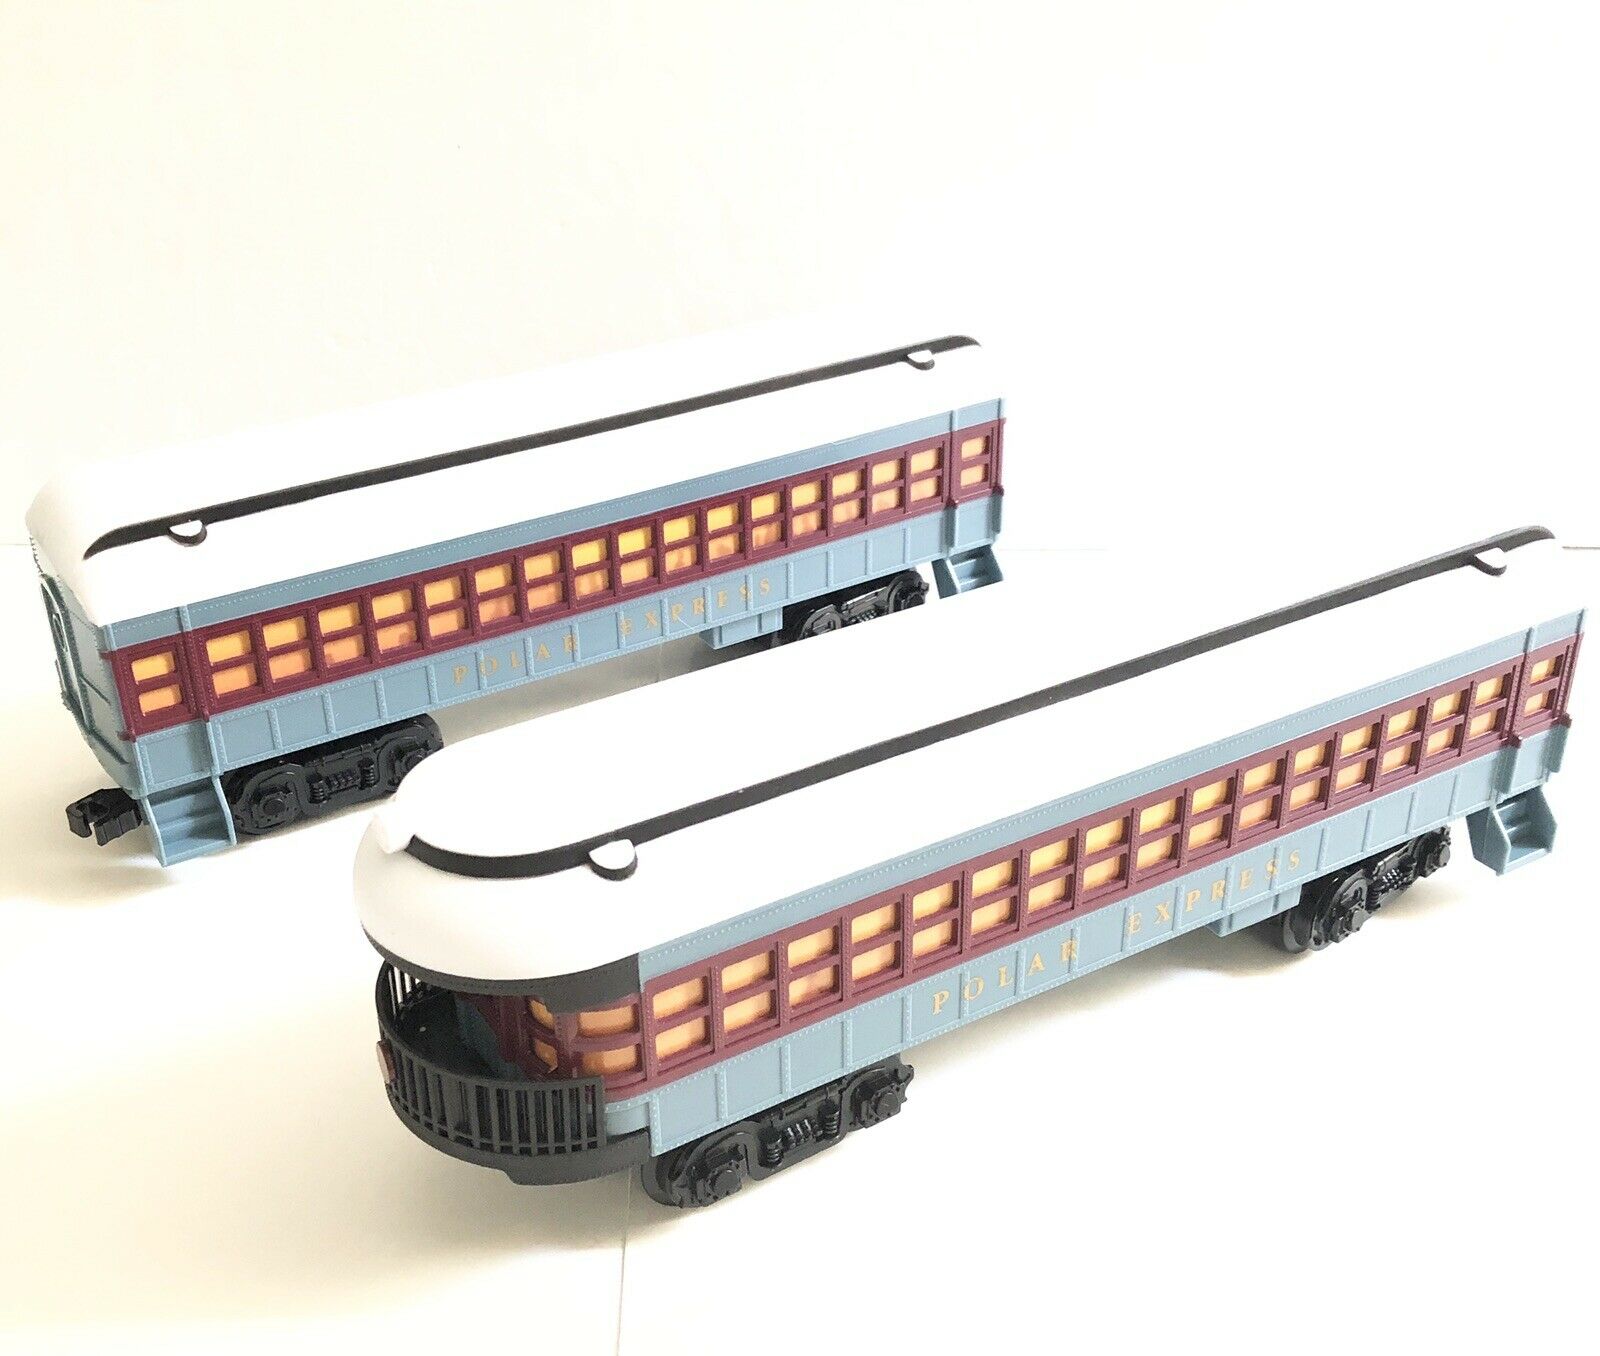 Polar Express Lionel Ready To Play 2 Passenger Cars 7-11824